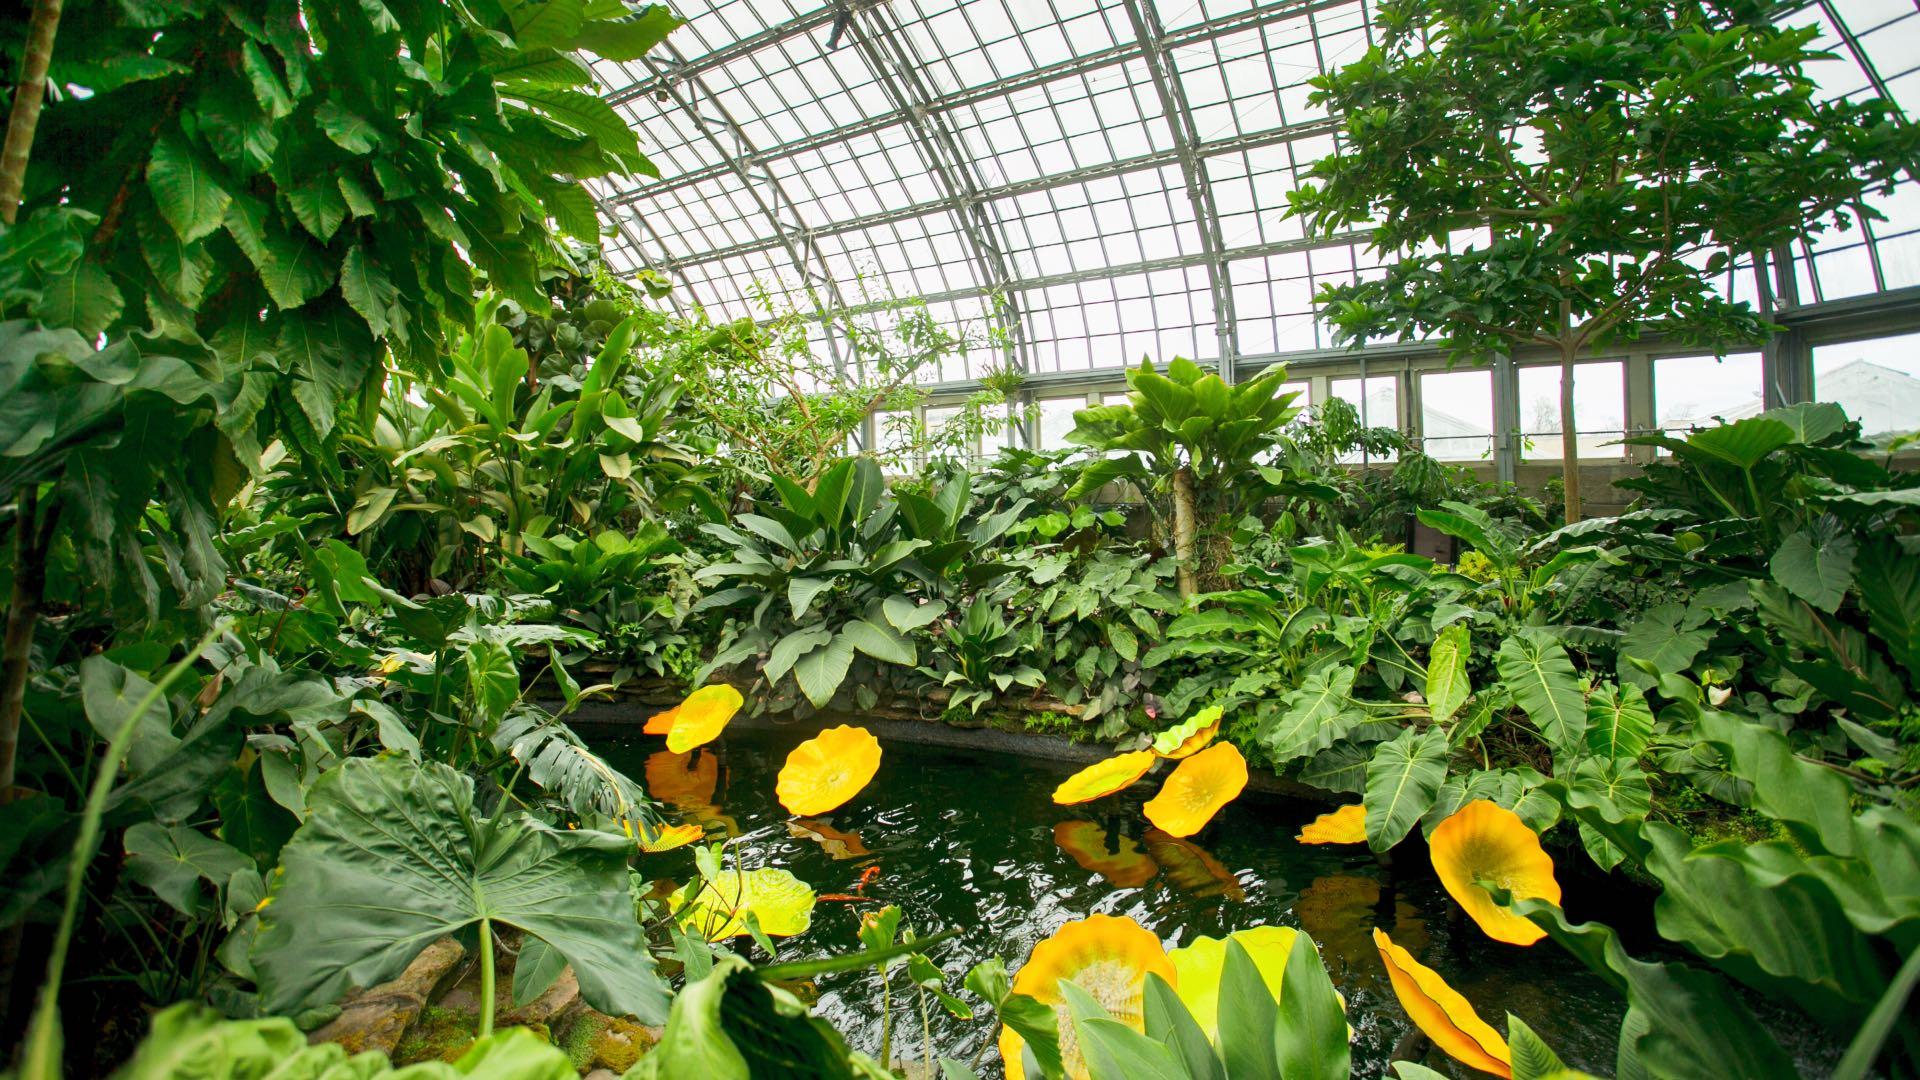 Garield Park Conservatory's indoor garden is reopening to visitors. (Courtesy of Garfield Park Conservatory)